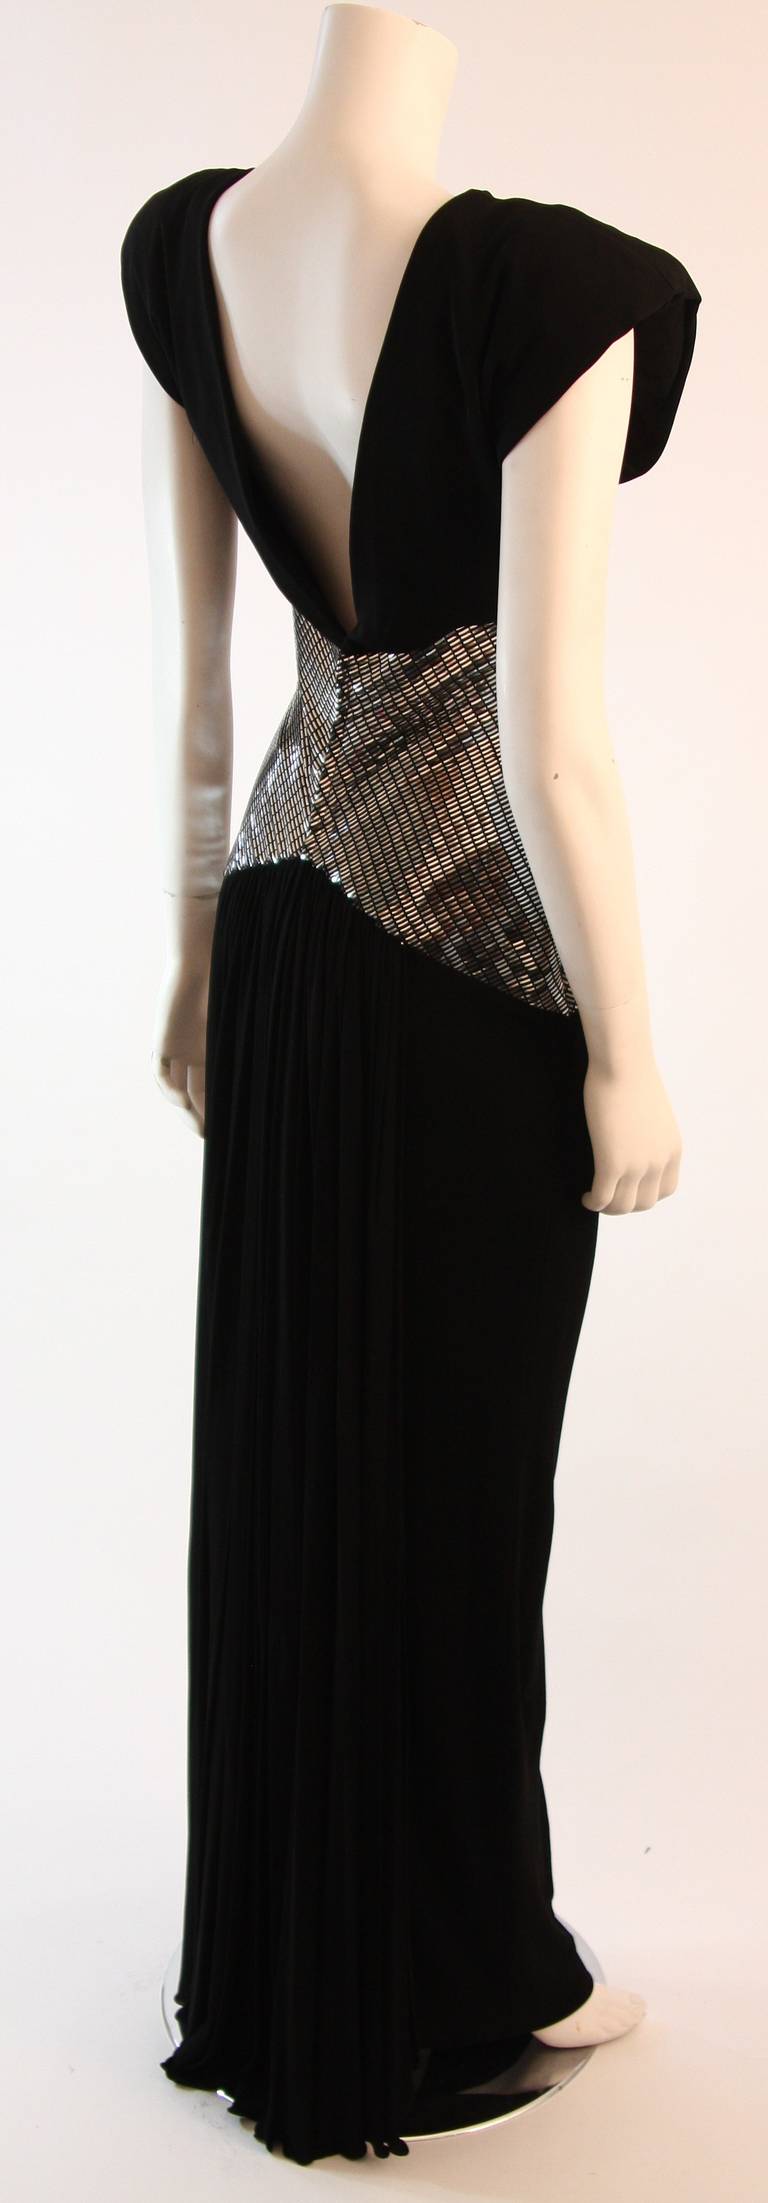 Ravishing Vicky Tiel Black Futurism Gown with Metallic Detail For Sale ...